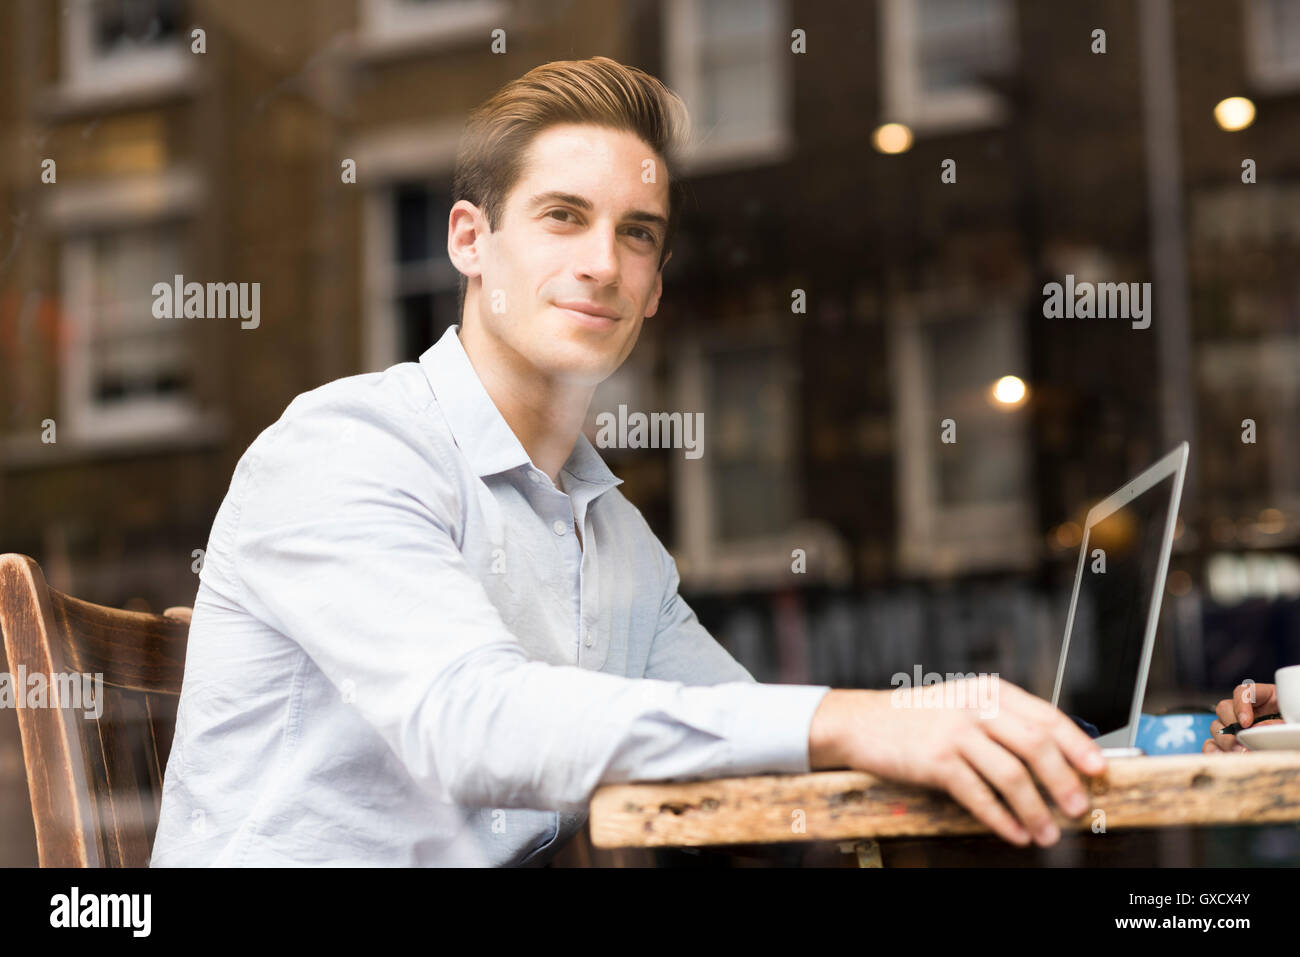 Window view of young businessman with laptop in cafe Banque D'Images